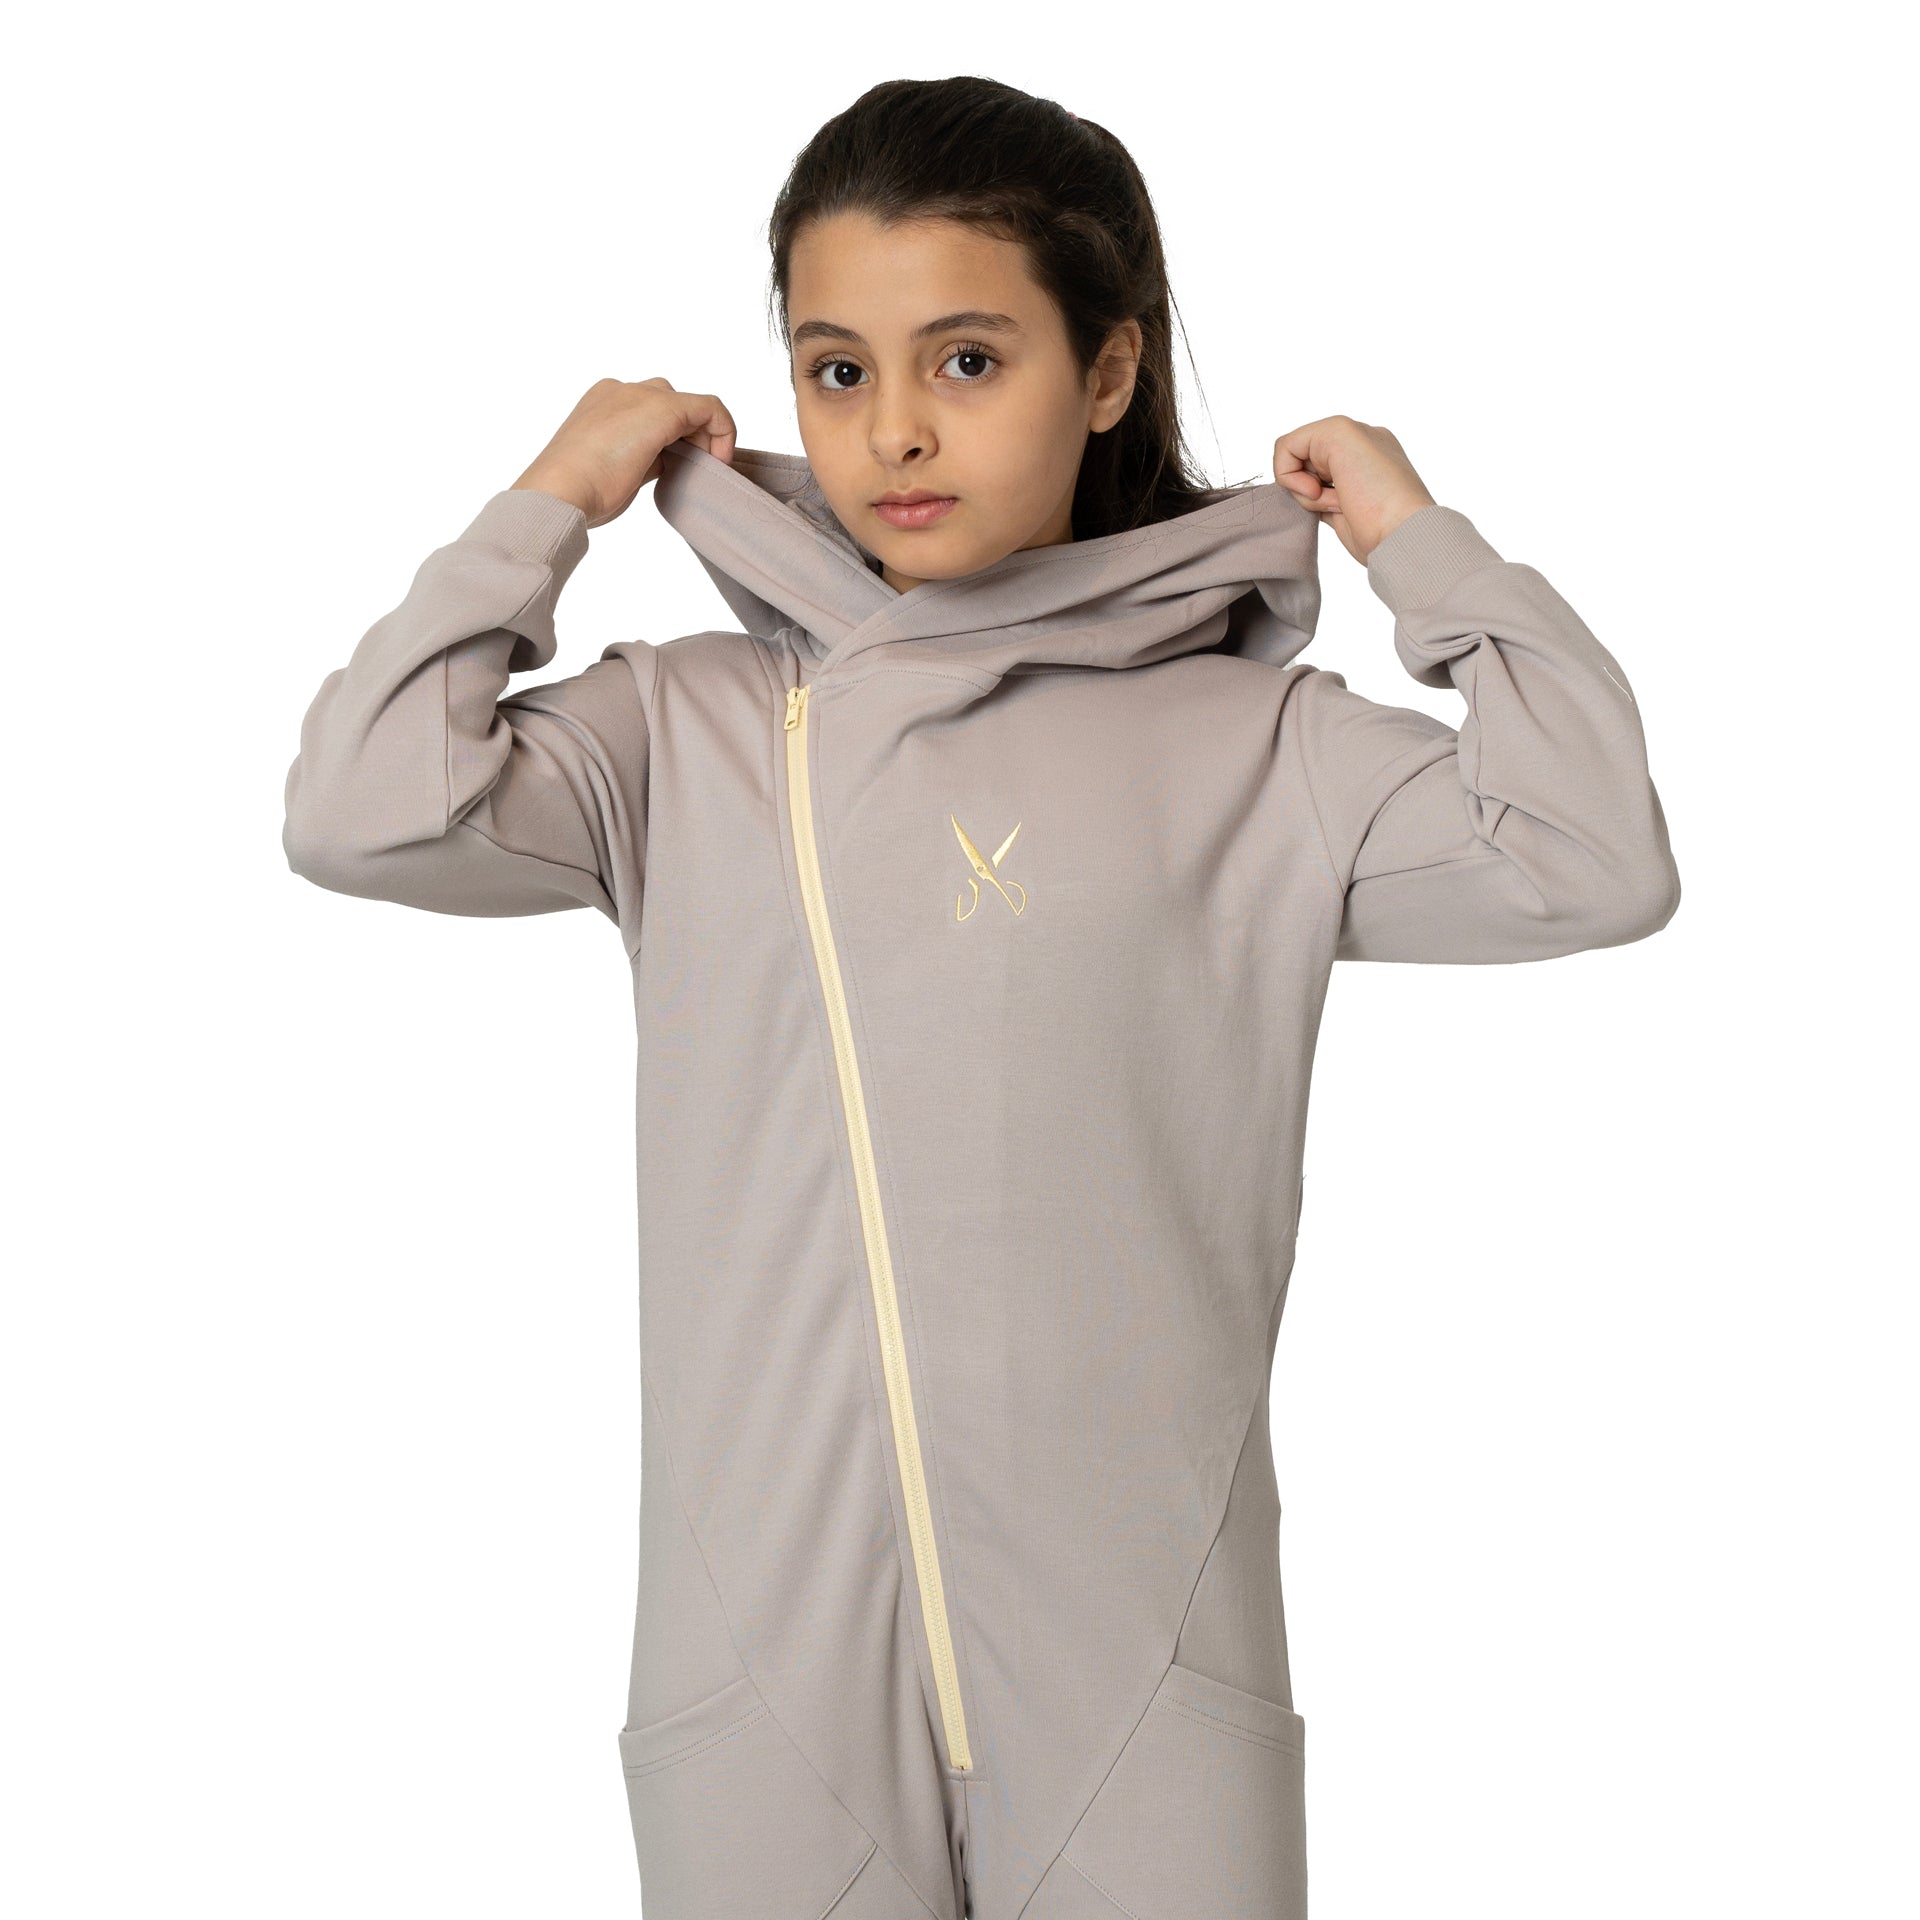 Gray Child Jumpsuit From Weaver Design